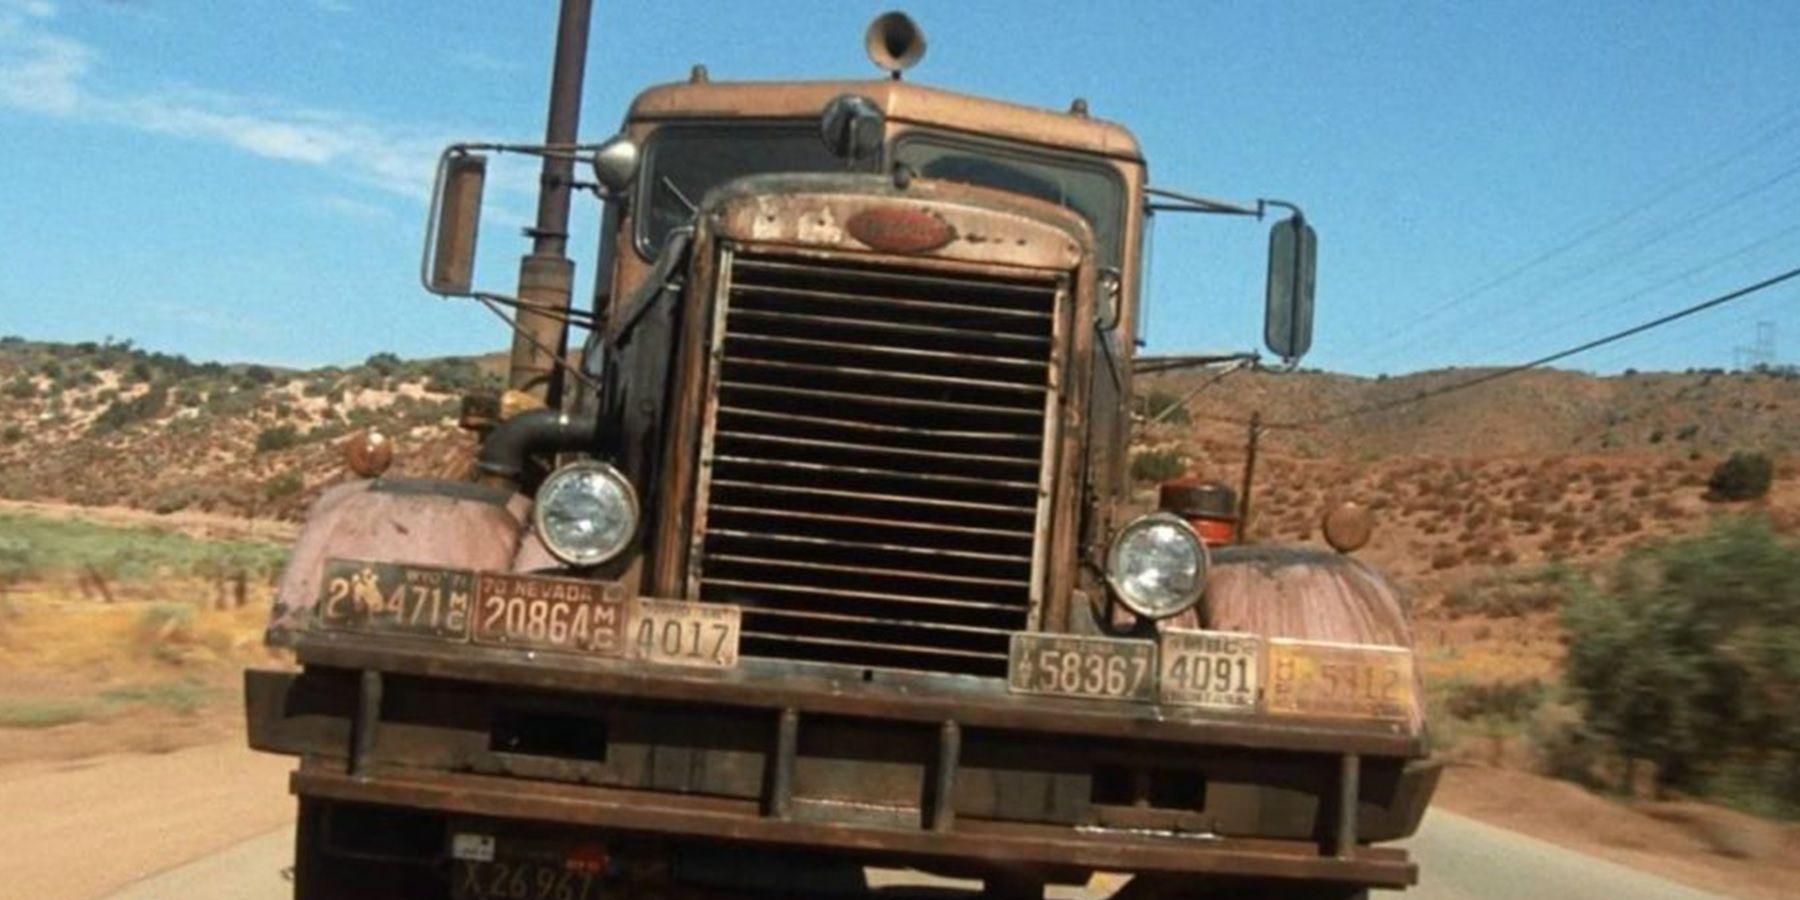 The truck in Duel